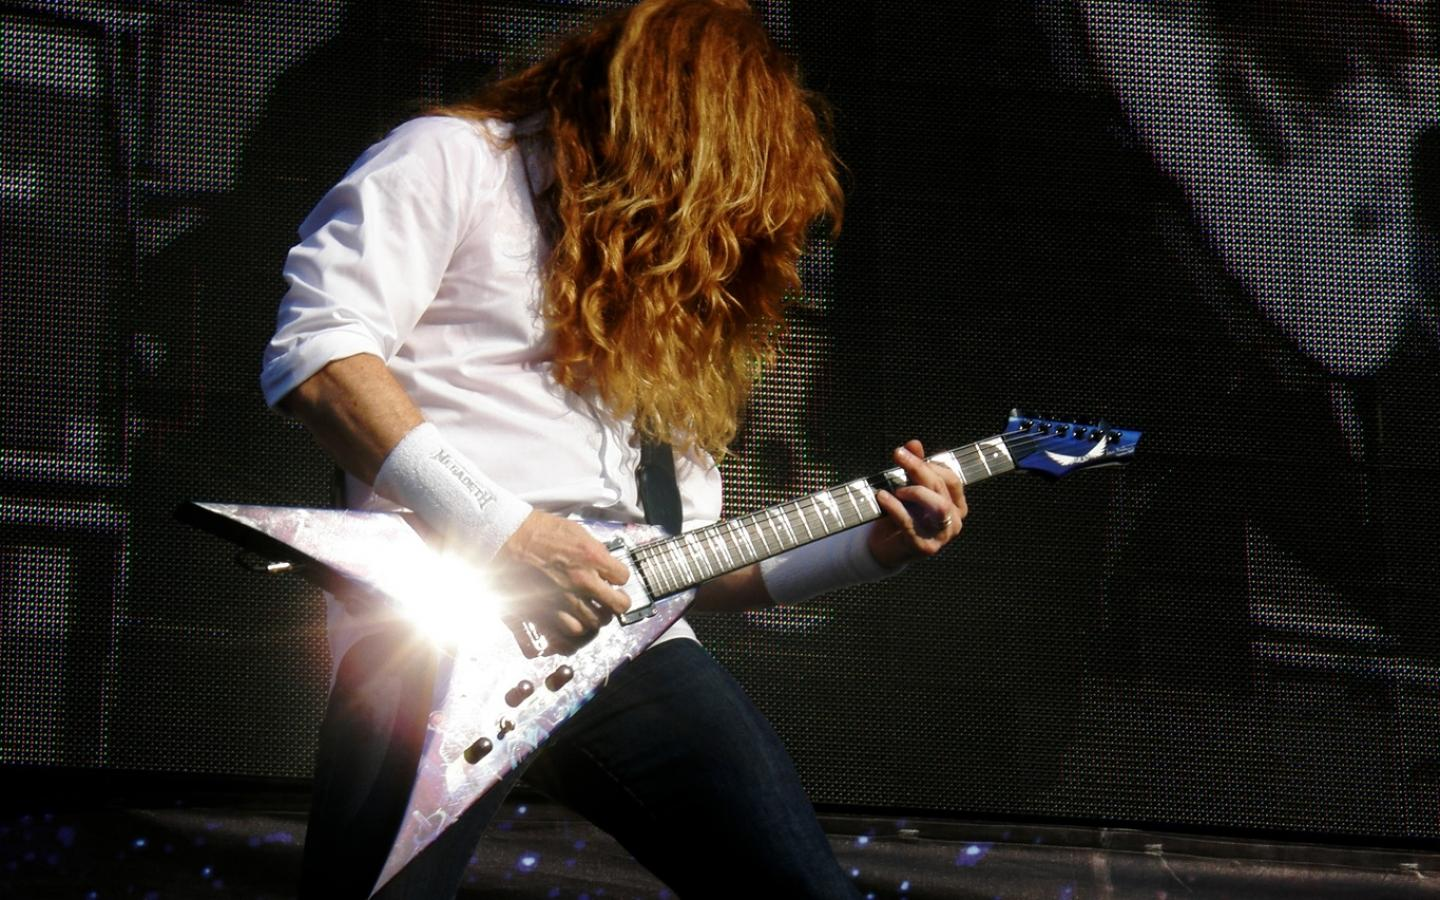 Dave Mustaine Wallpapers